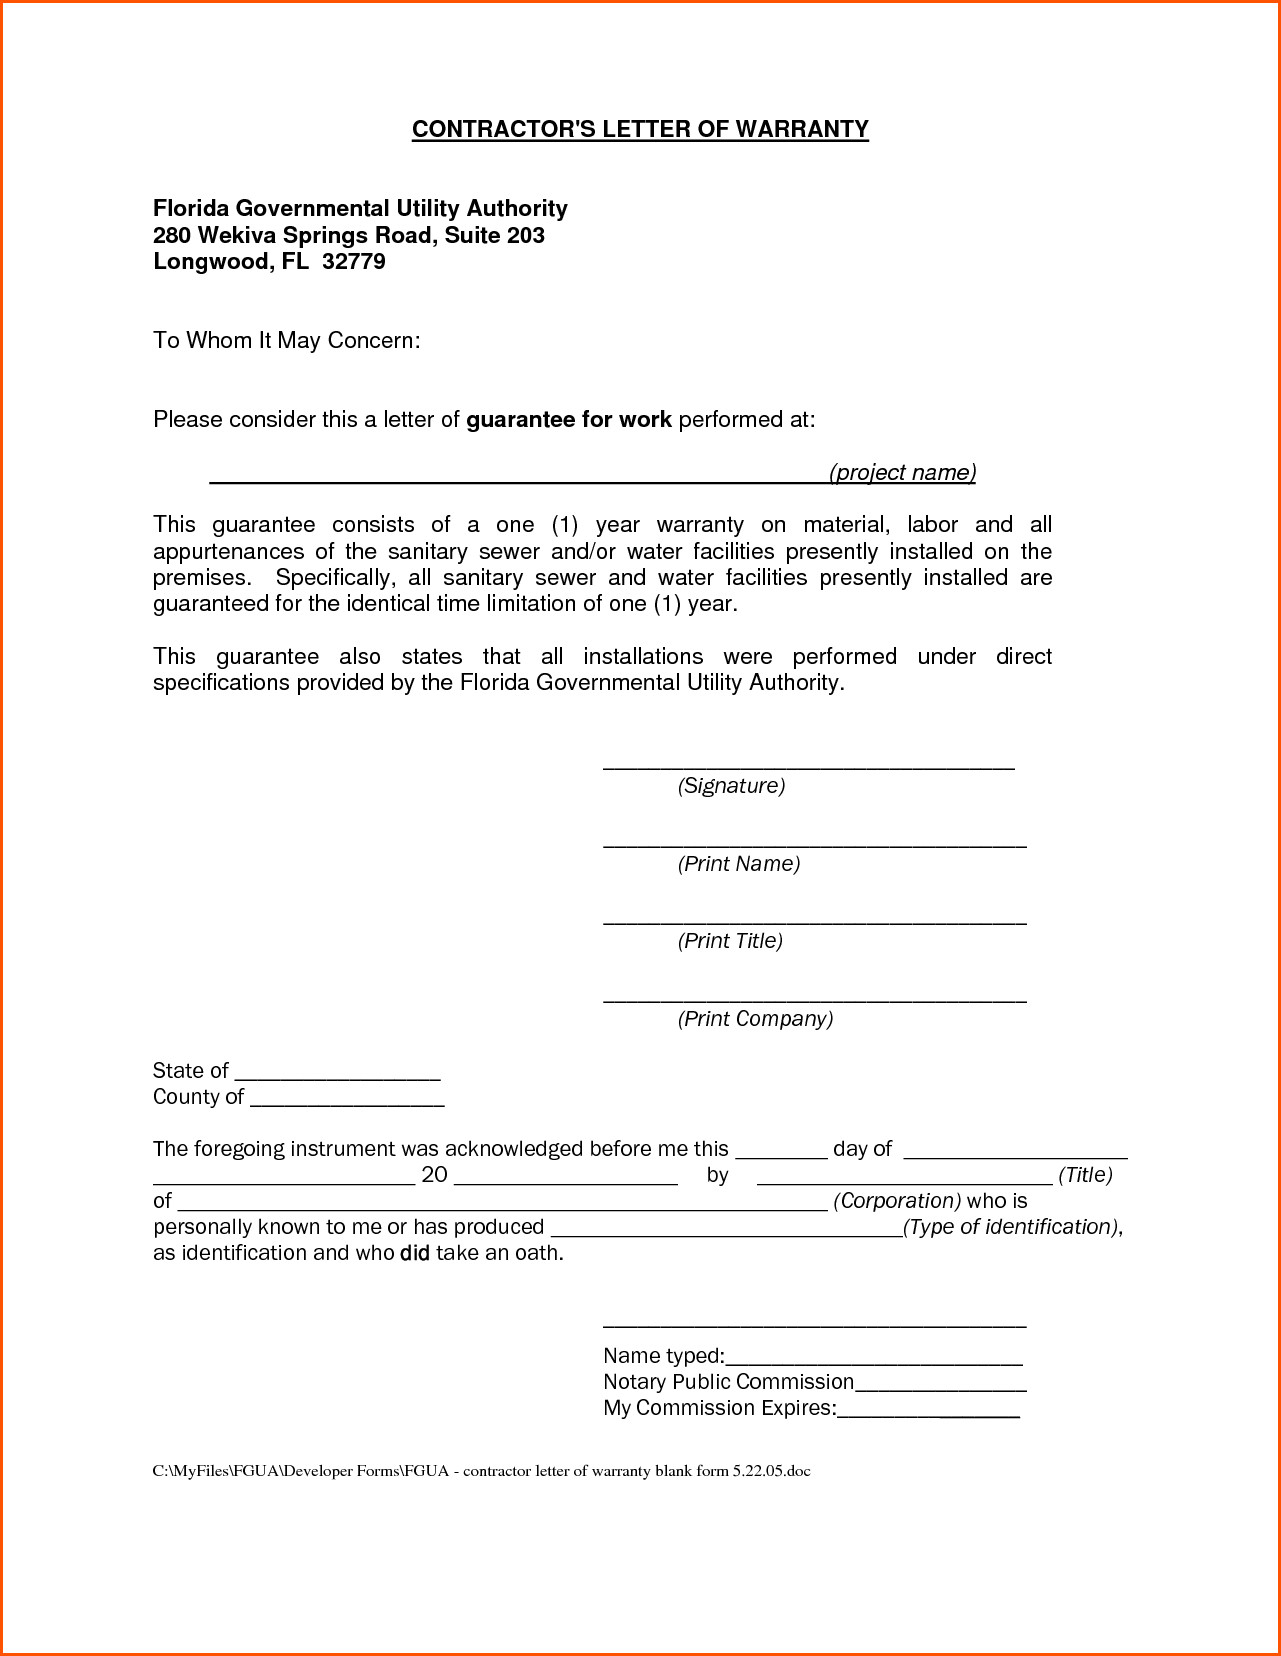 Construction Warranty Letter Template Free - Construction Warranty Template Letter Resizeu 003 D 720 931 Publish